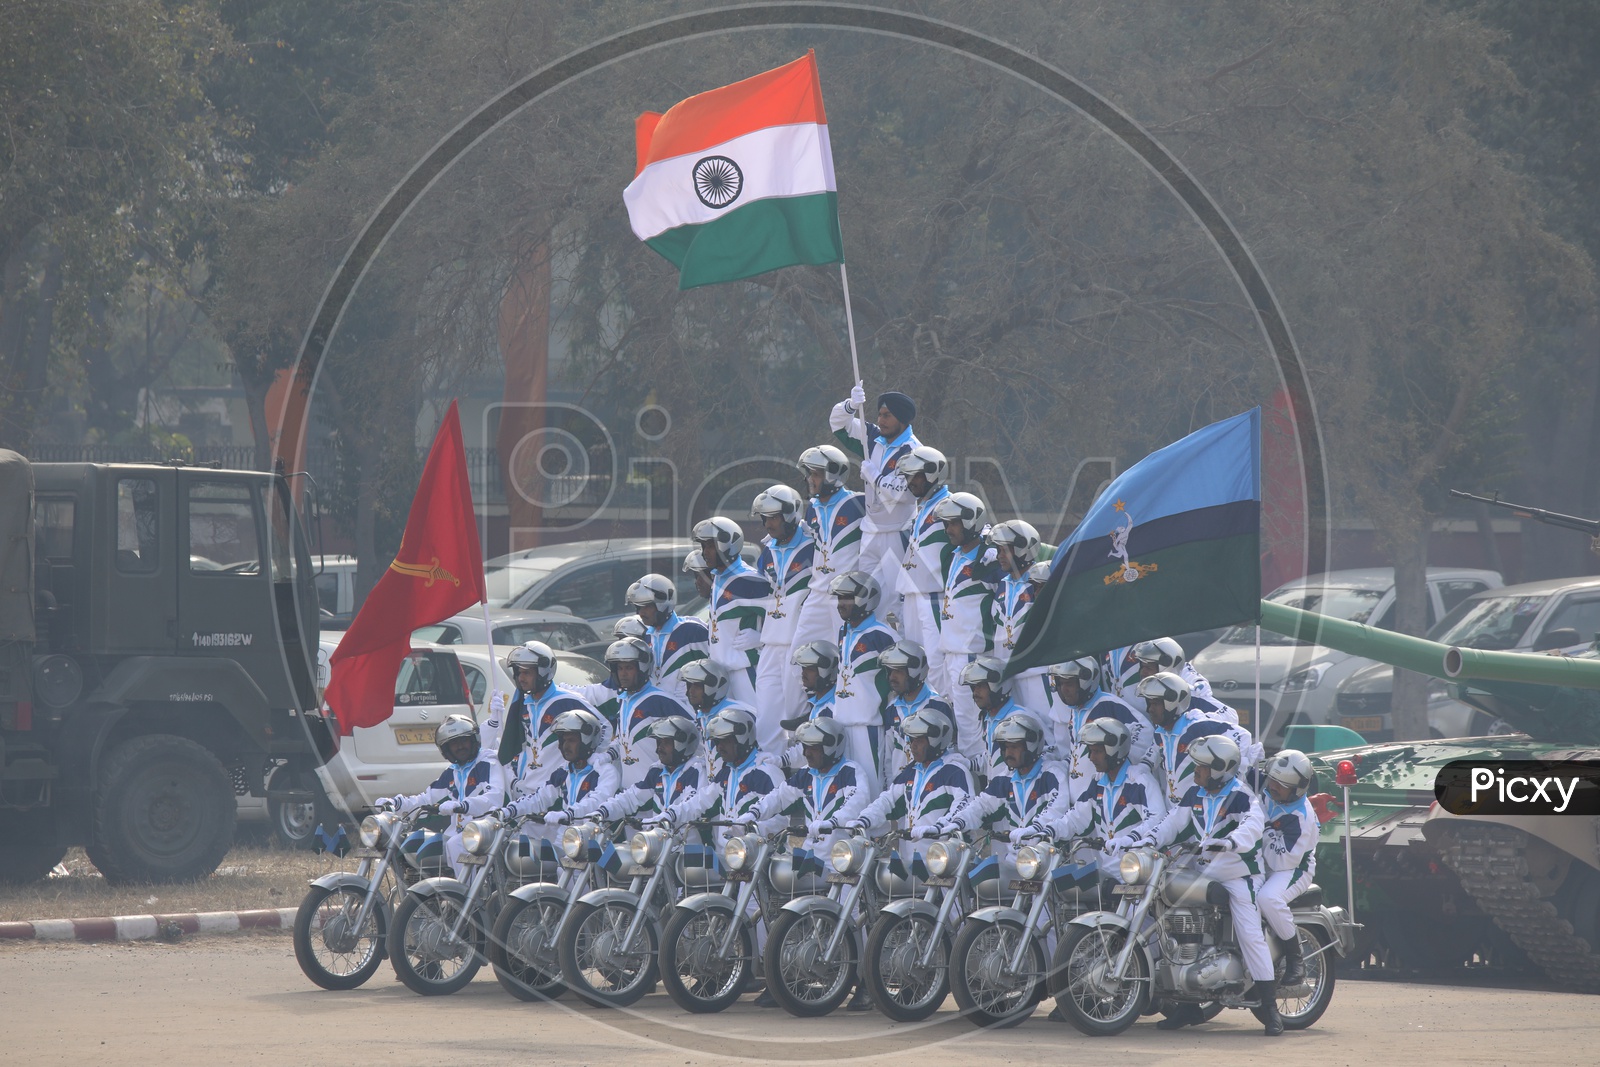 Indian Army Soldiers Performing Bike Stunts on Army Day